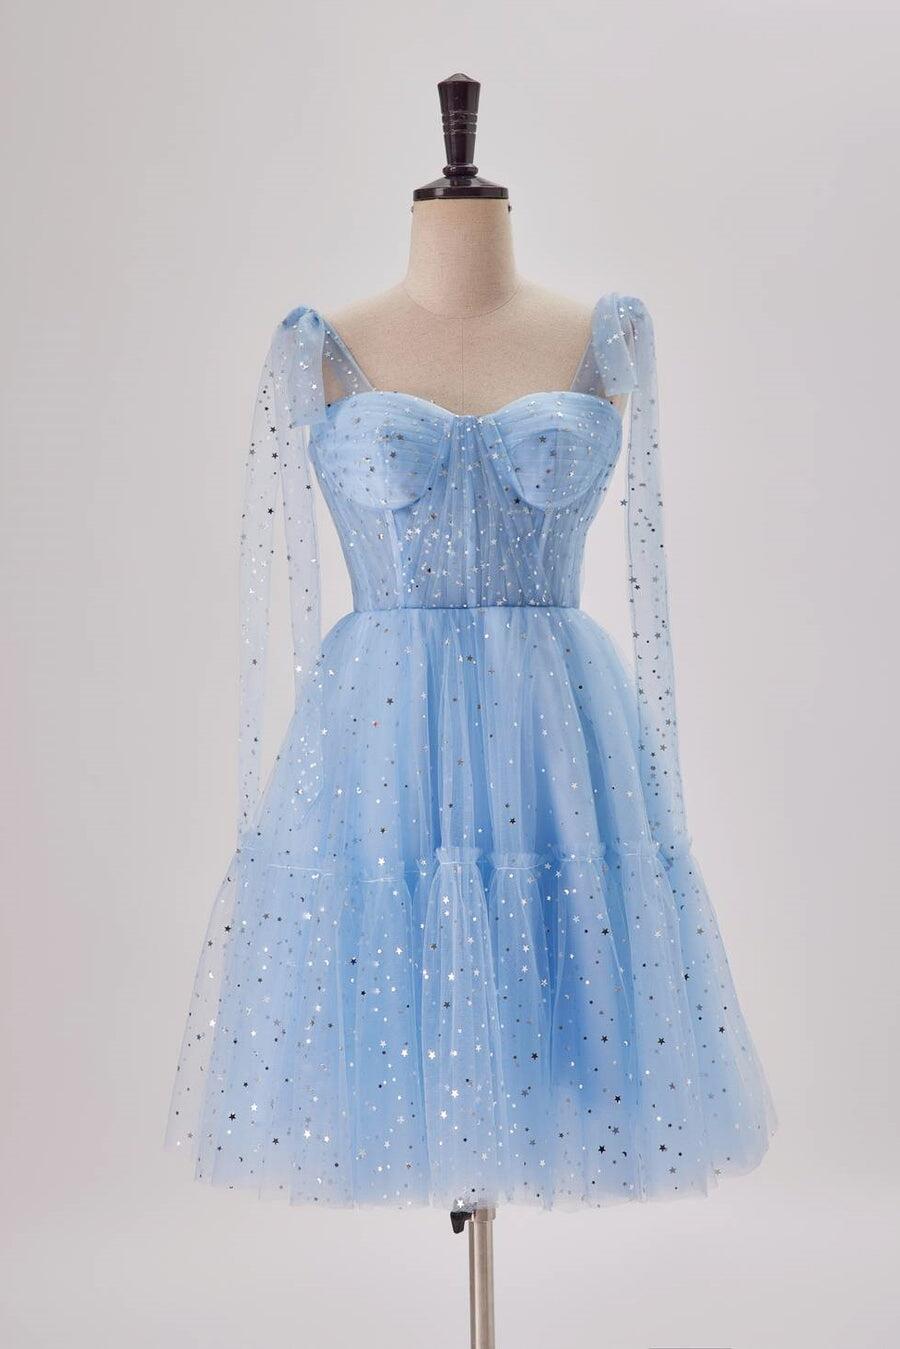 Starry Light Blue Tulle A-line Princess Dress Gowns, Bridesmaid Dresses Pink